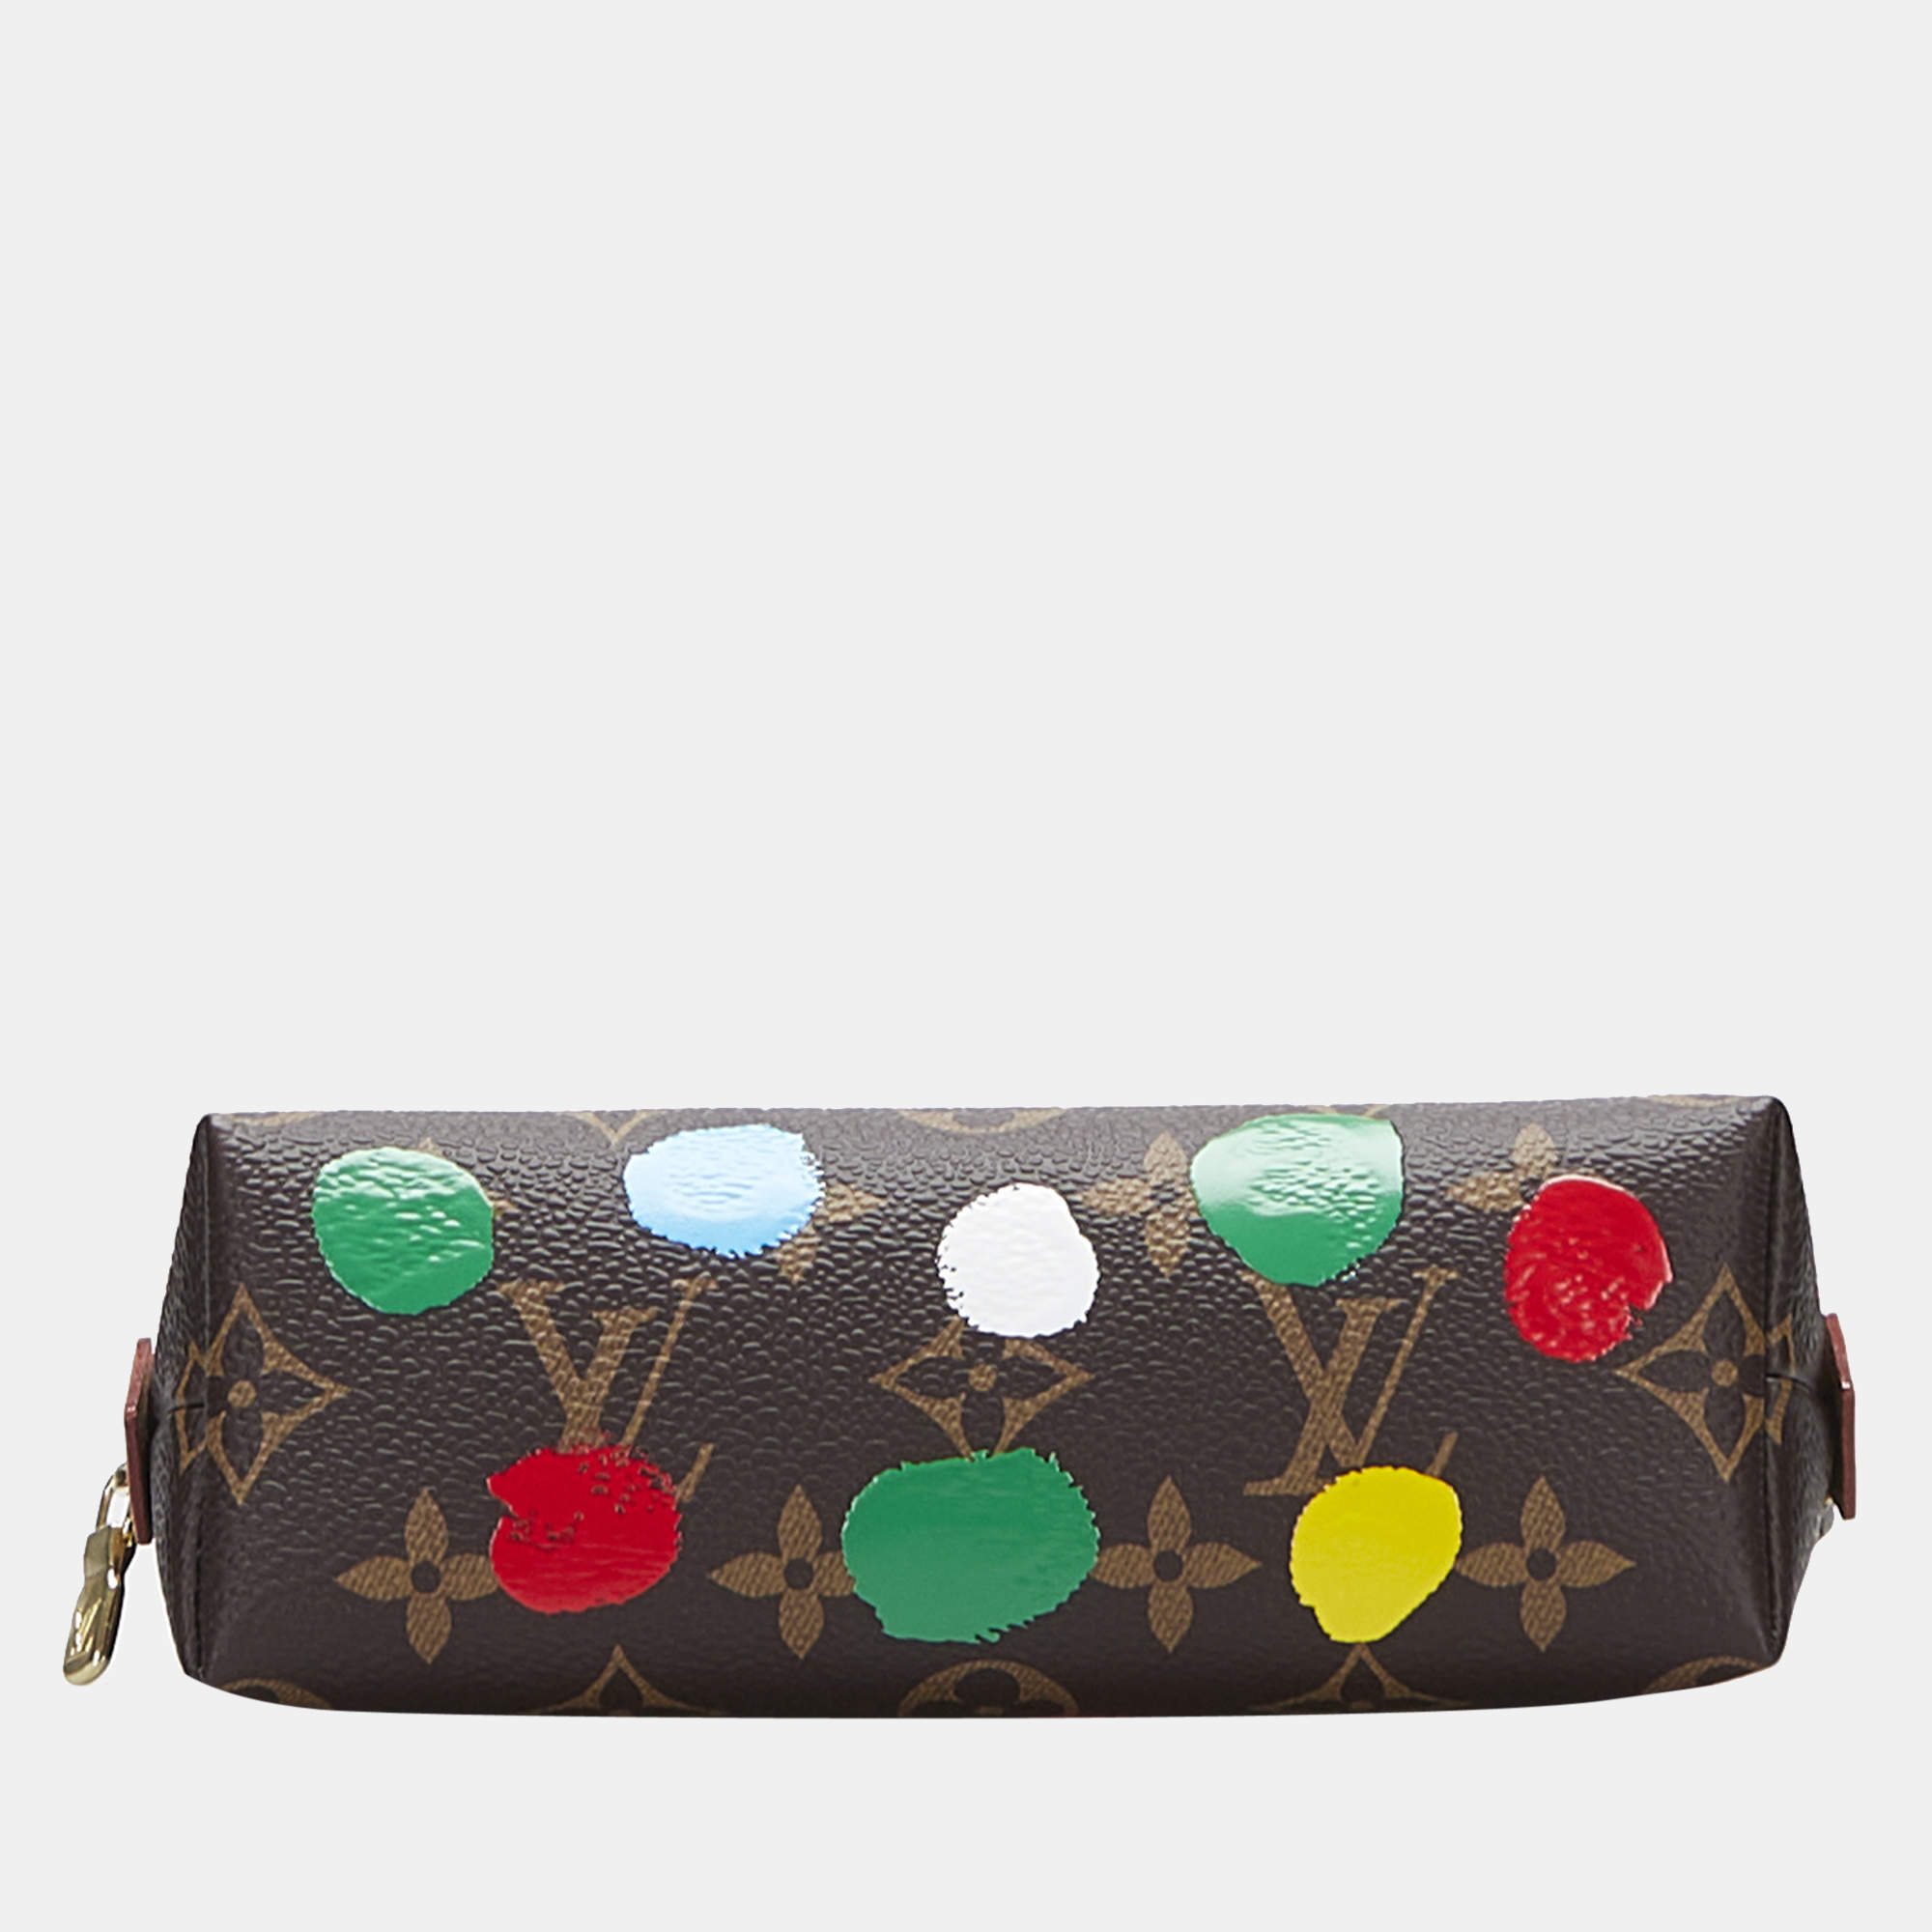 Louis Vuitton Monogram Cosmetic Pouch PM - Brown Cosmetic Bags, Accessories  - LOU770282